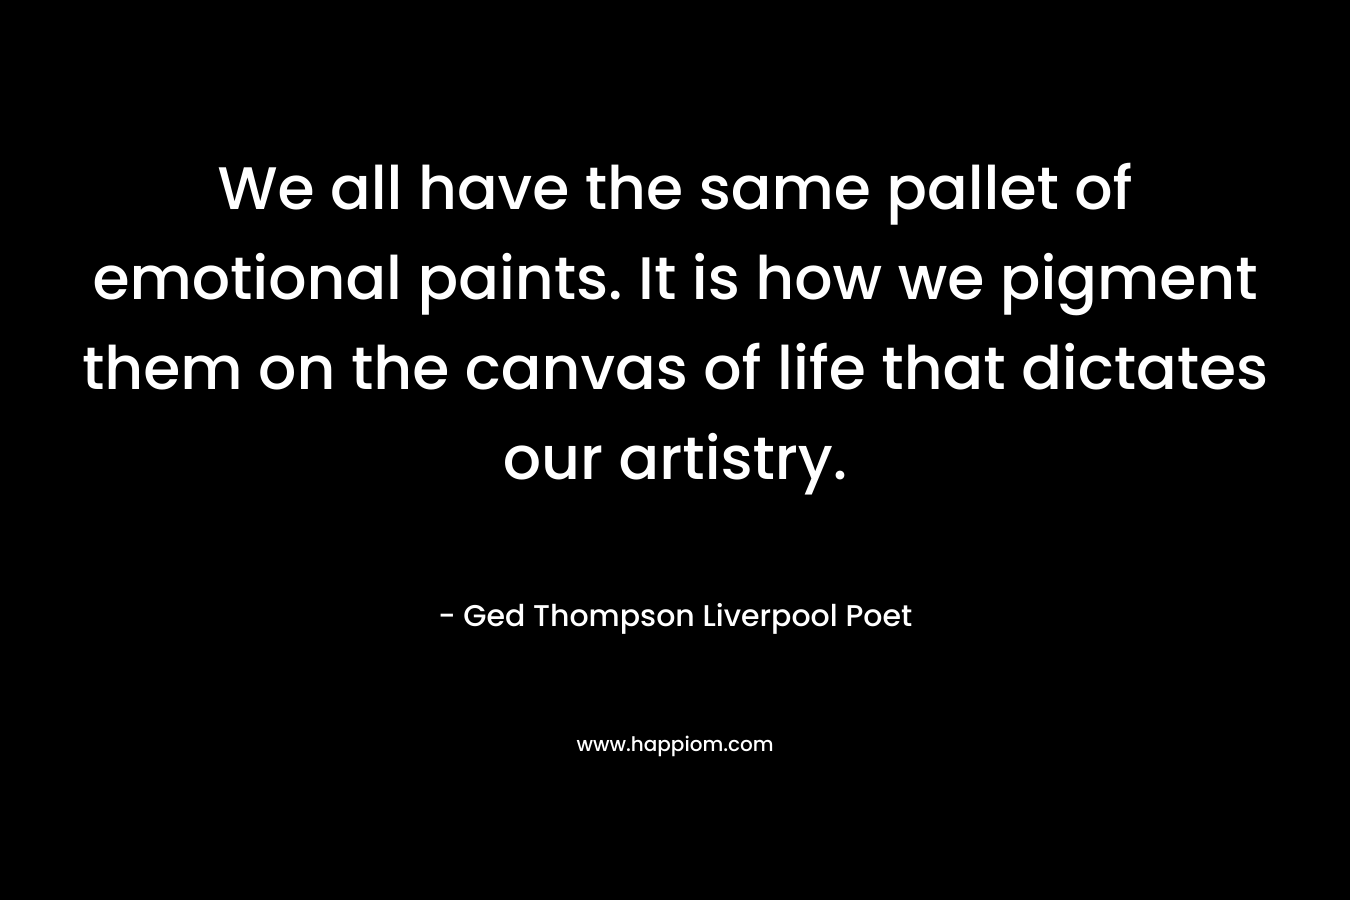 We all have the same pallet of emotional paints. It is how we pigment them on the canvas of life that dictates our artistry. – Ged Thompson Liverpool Poet